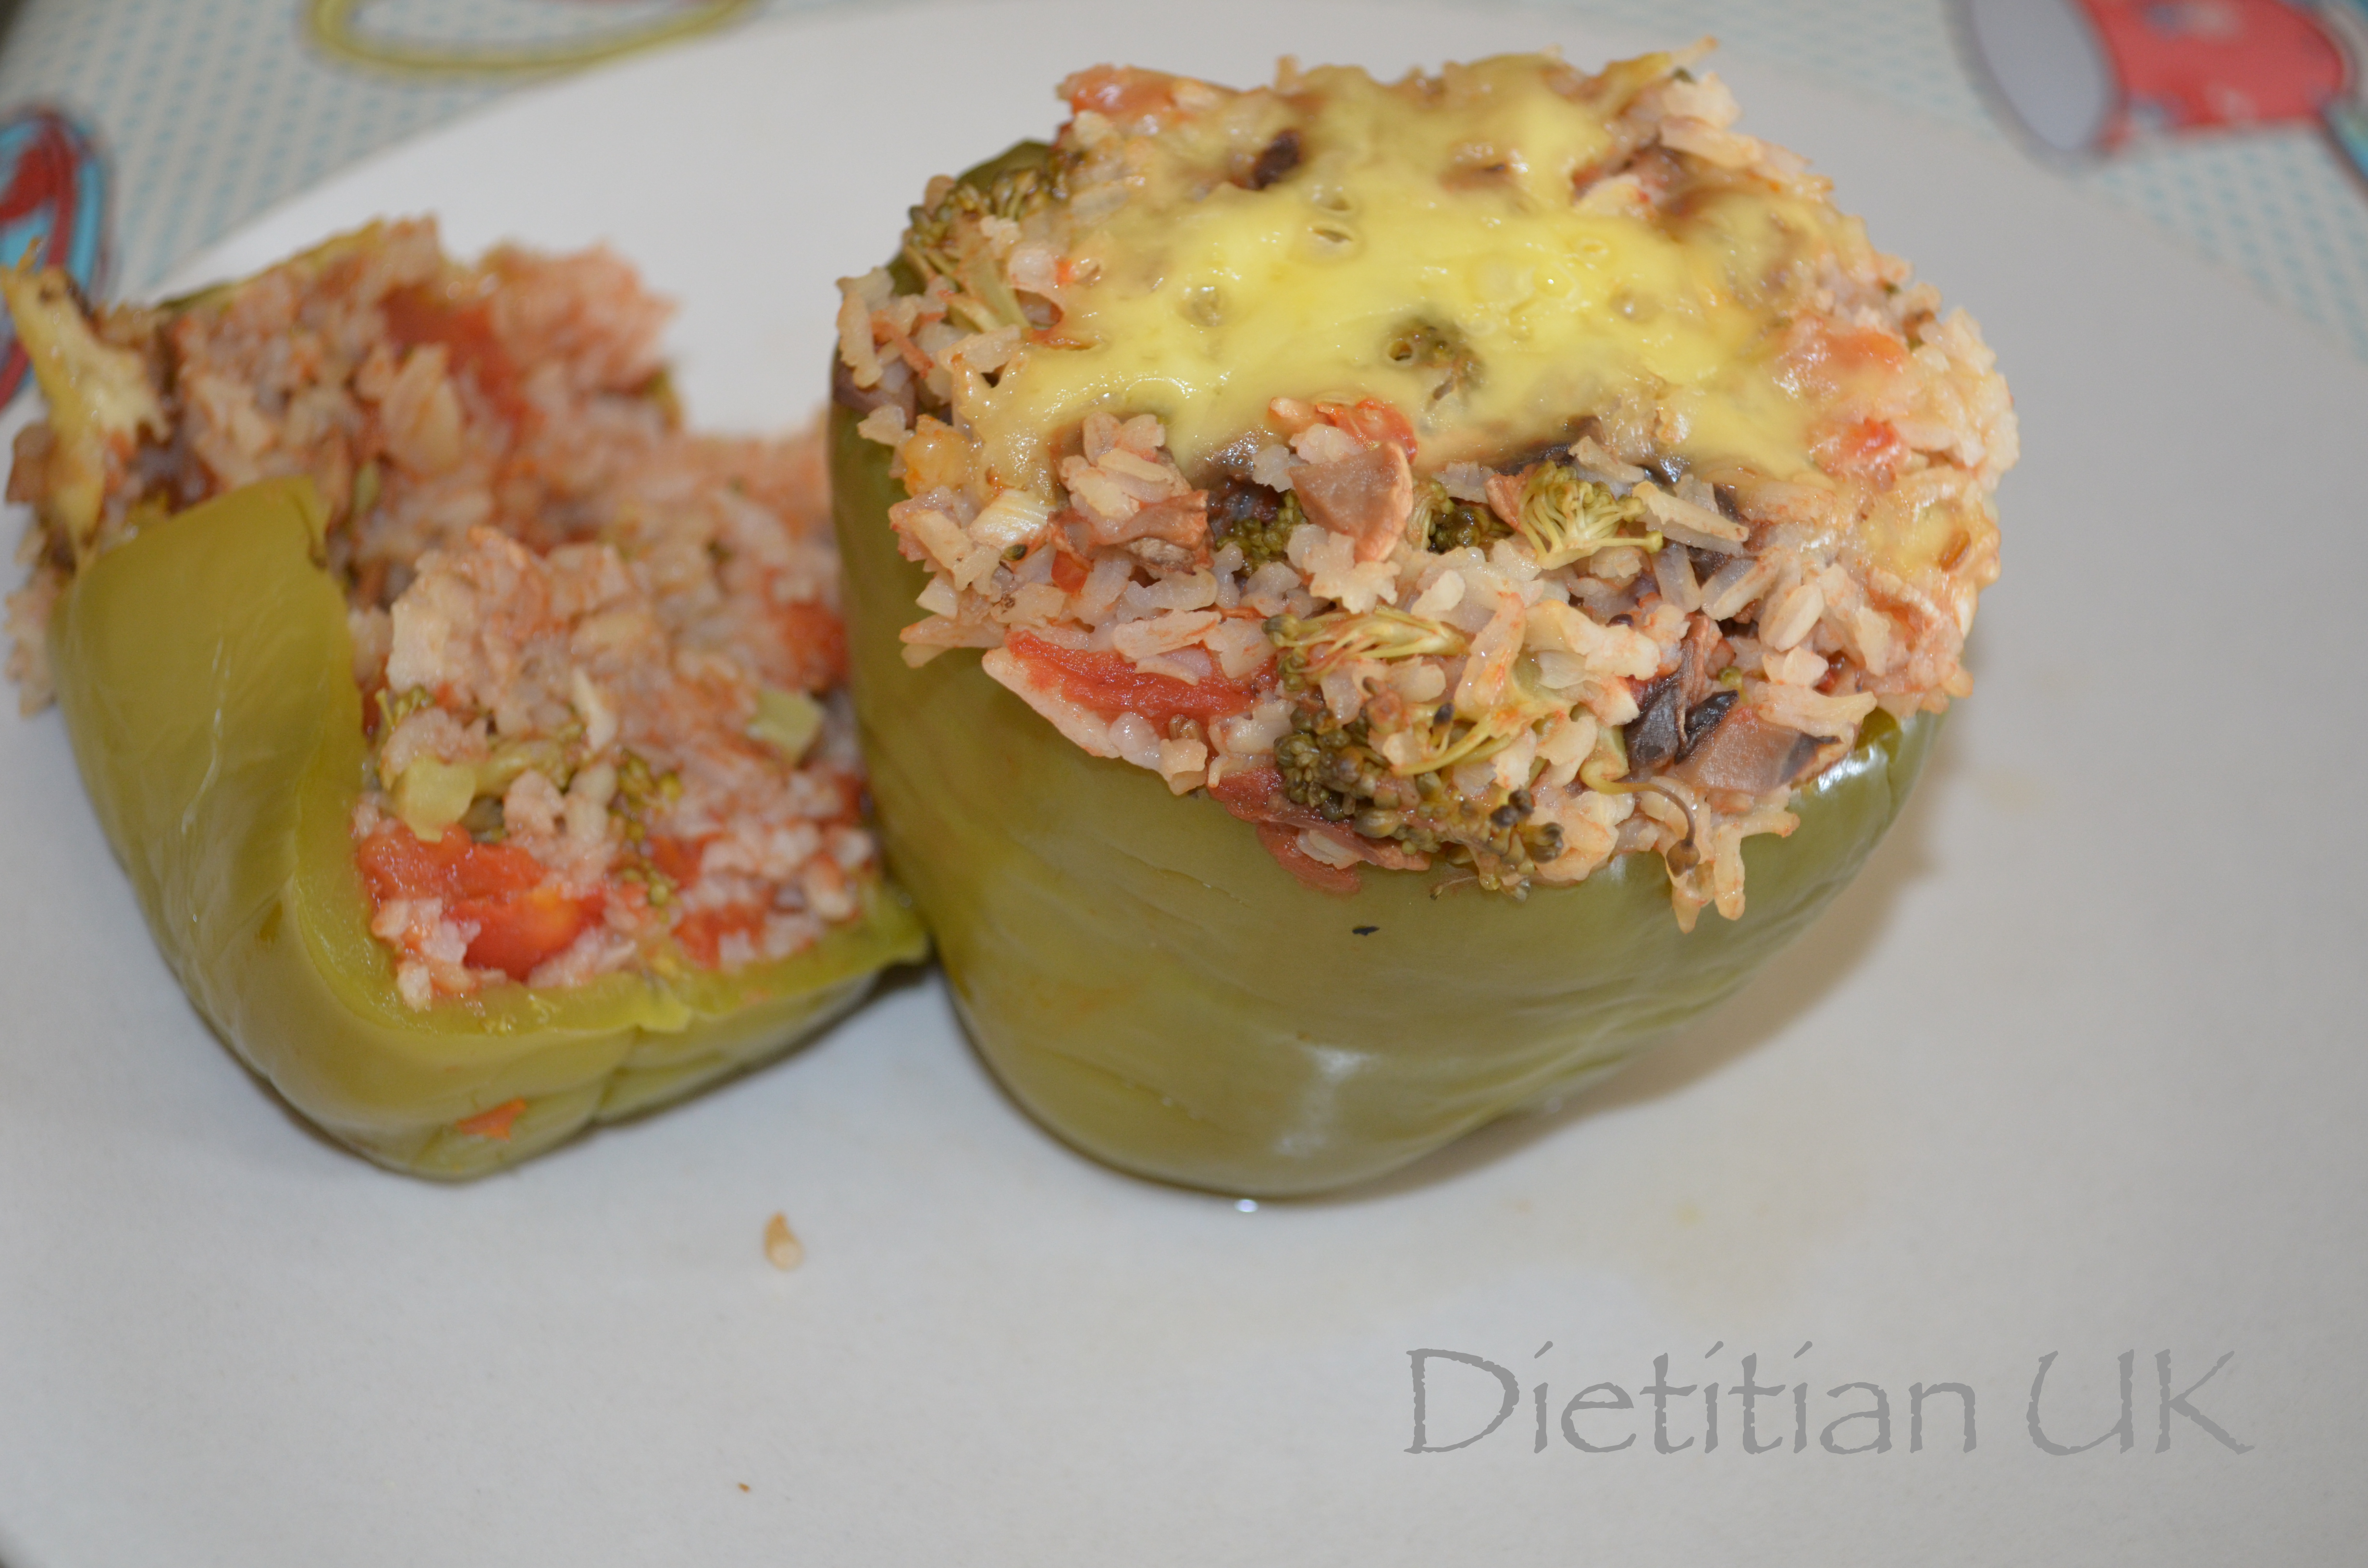 Slow cooker Stuffed Peppers, yes really!